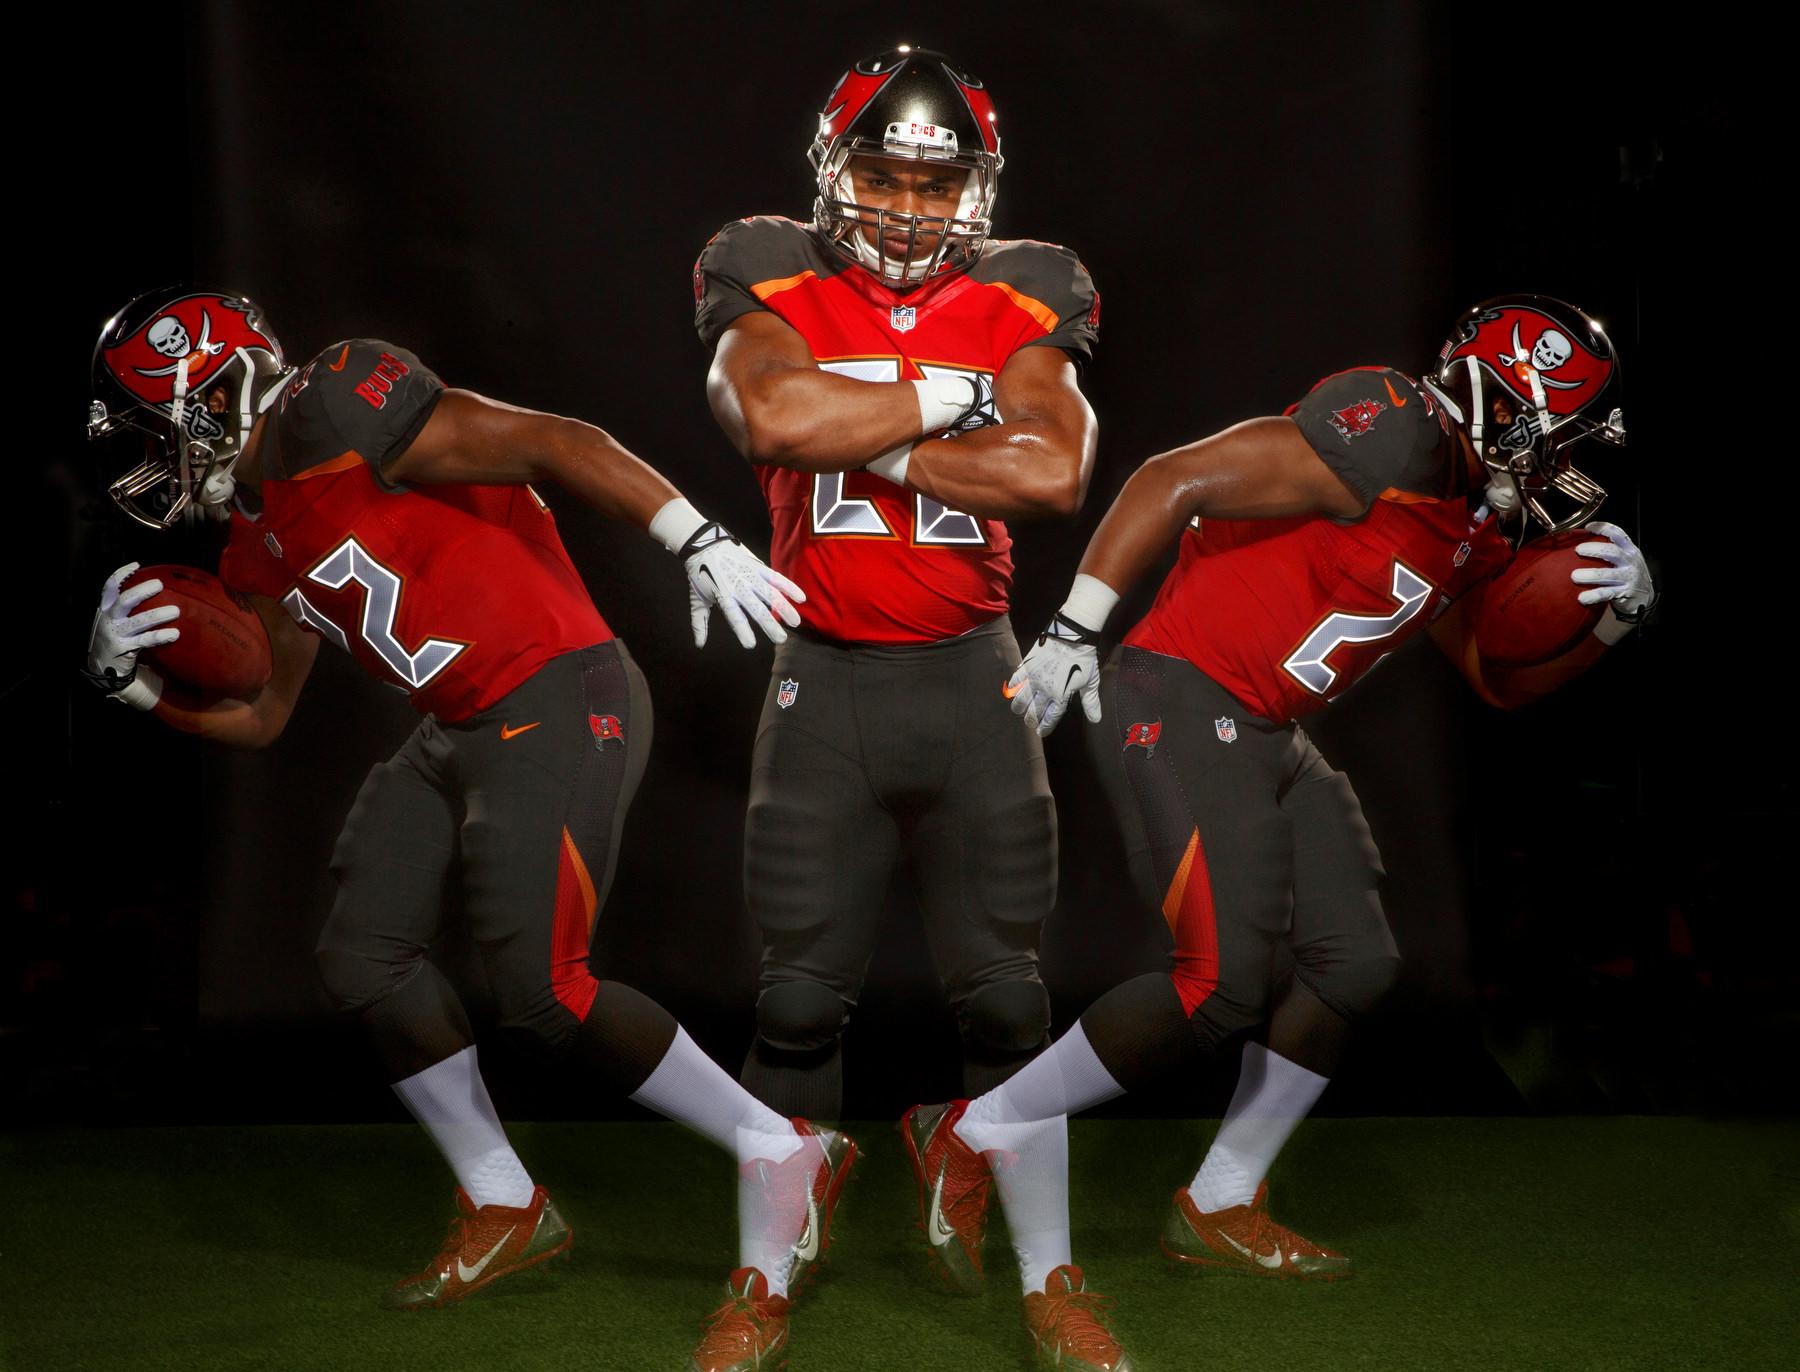 NFL Photography: The New Look Tampa Bay Buccaneers